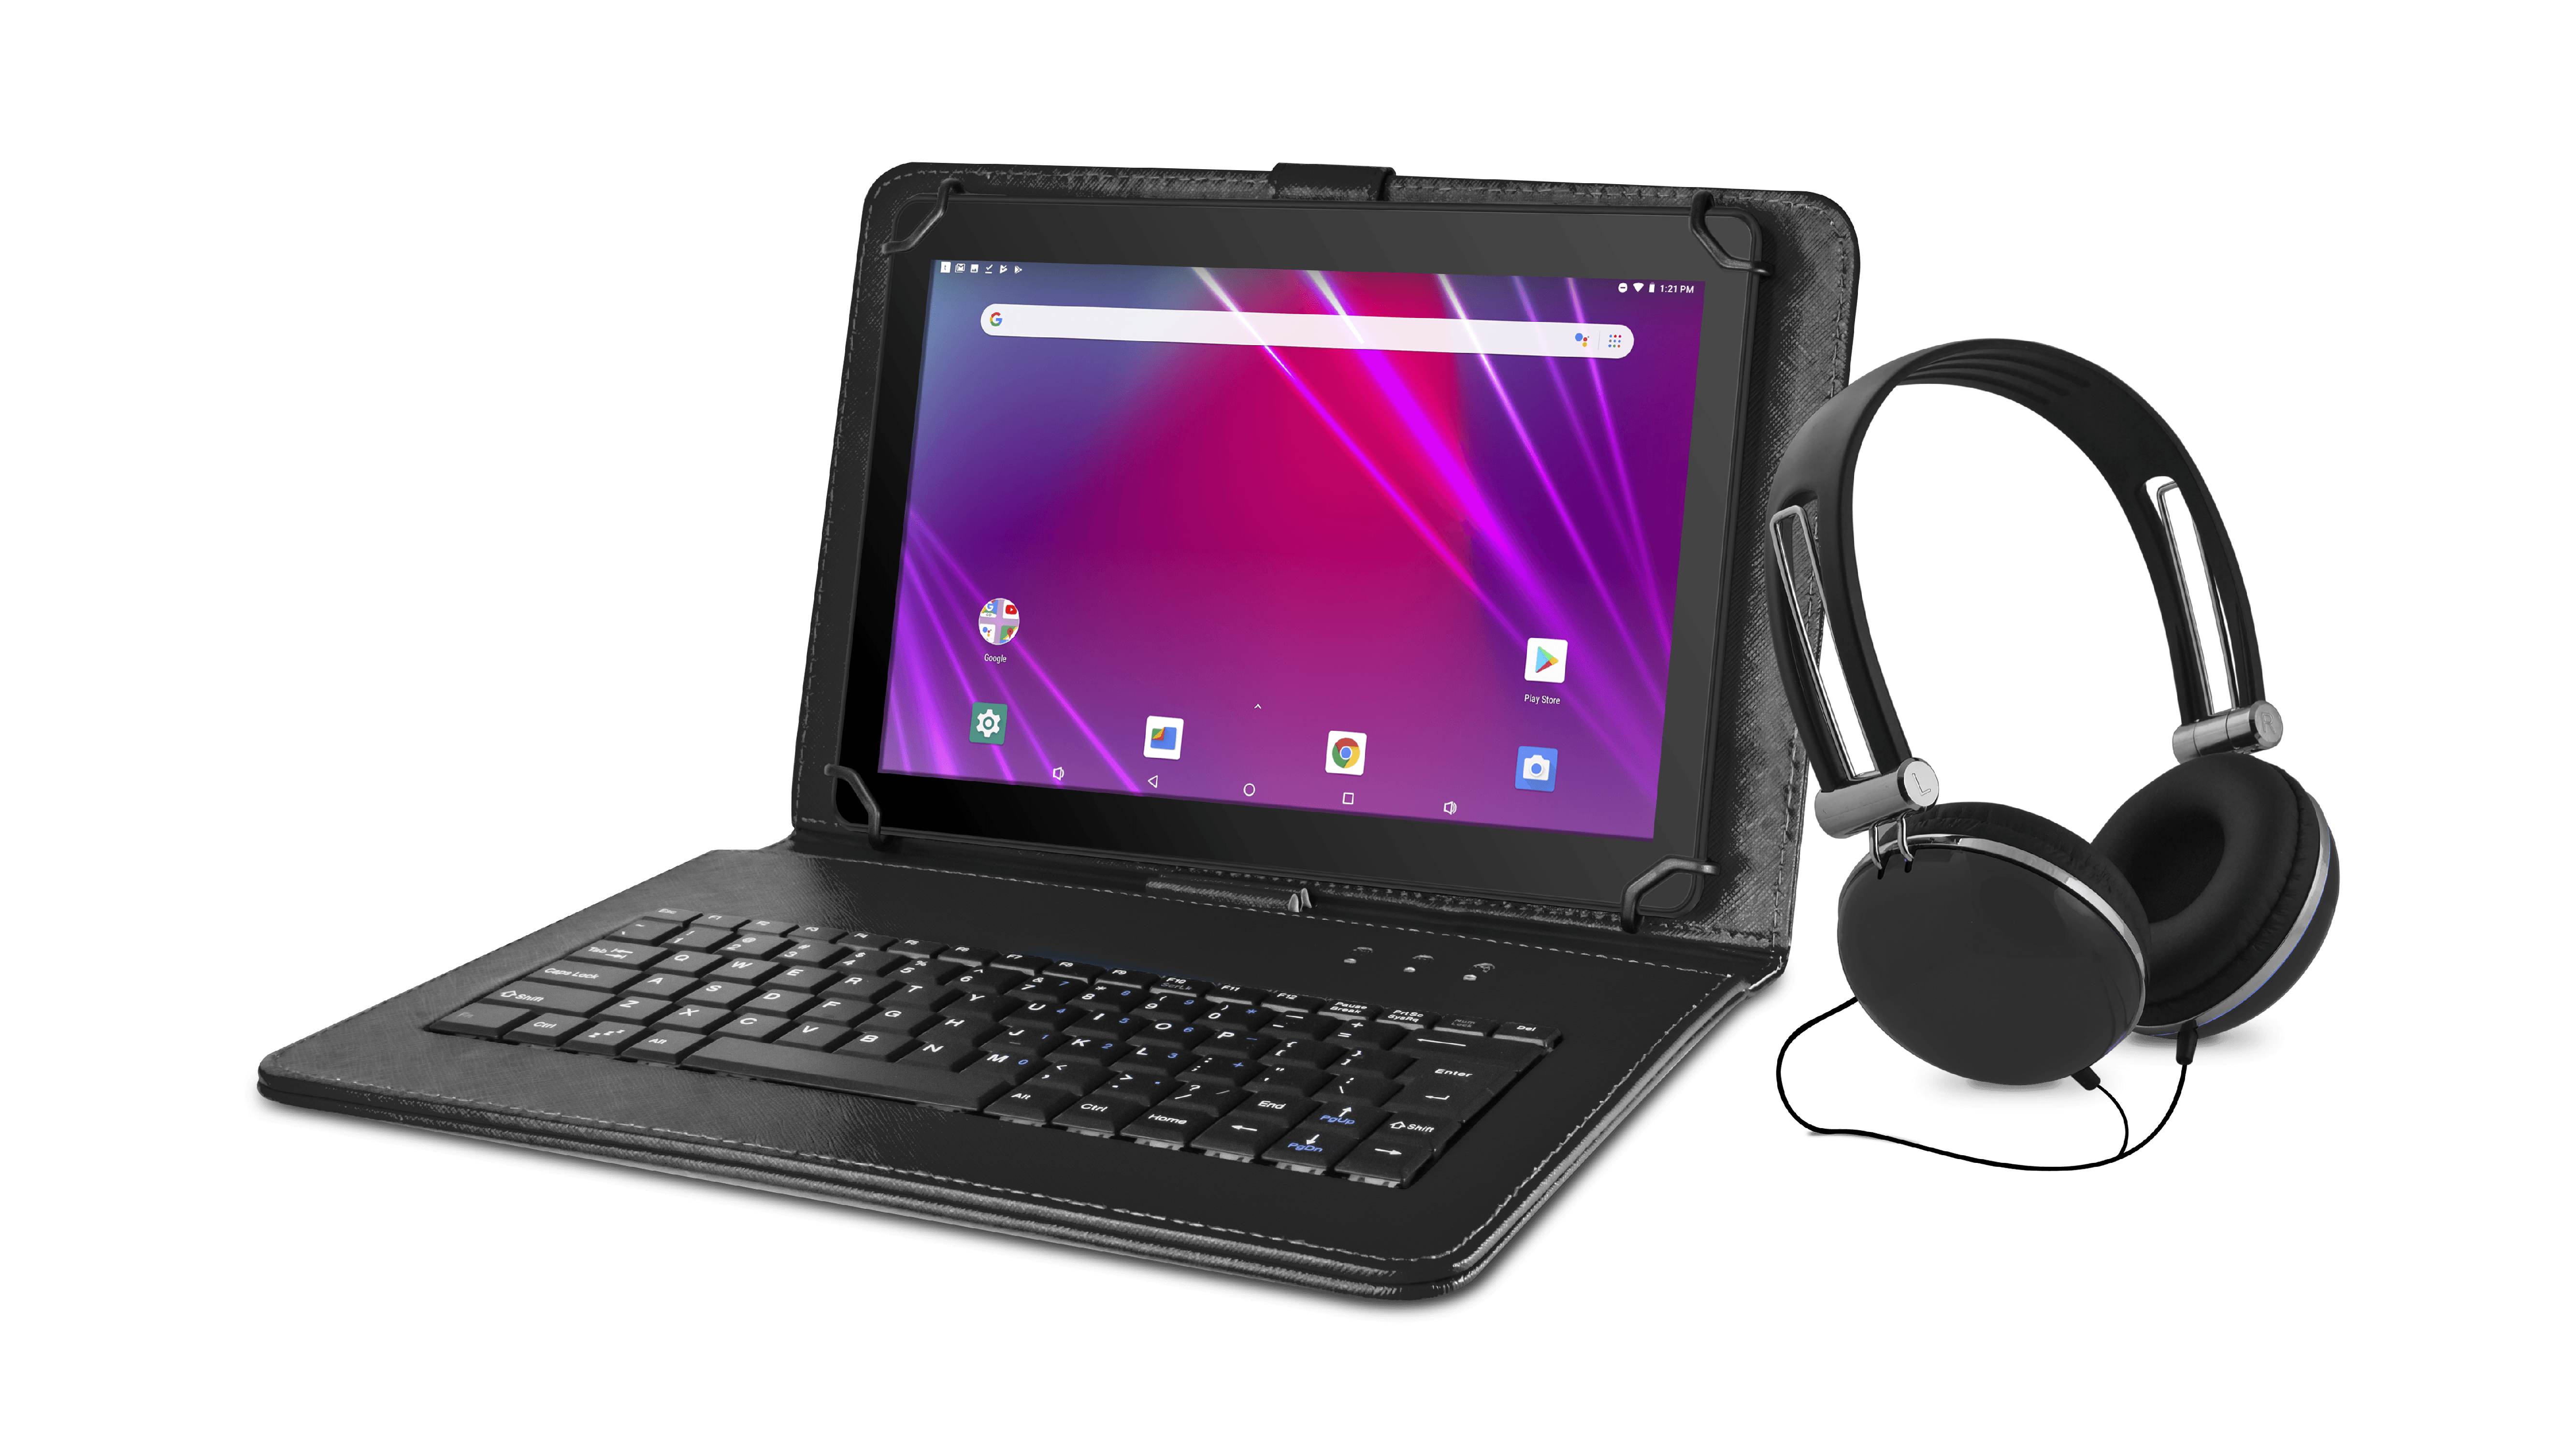 Ematic 10.1" 16GB Android Tablet + Keyboard Folio Case and Headphones, Black (EGQ238BDBL) - image 1 of 9